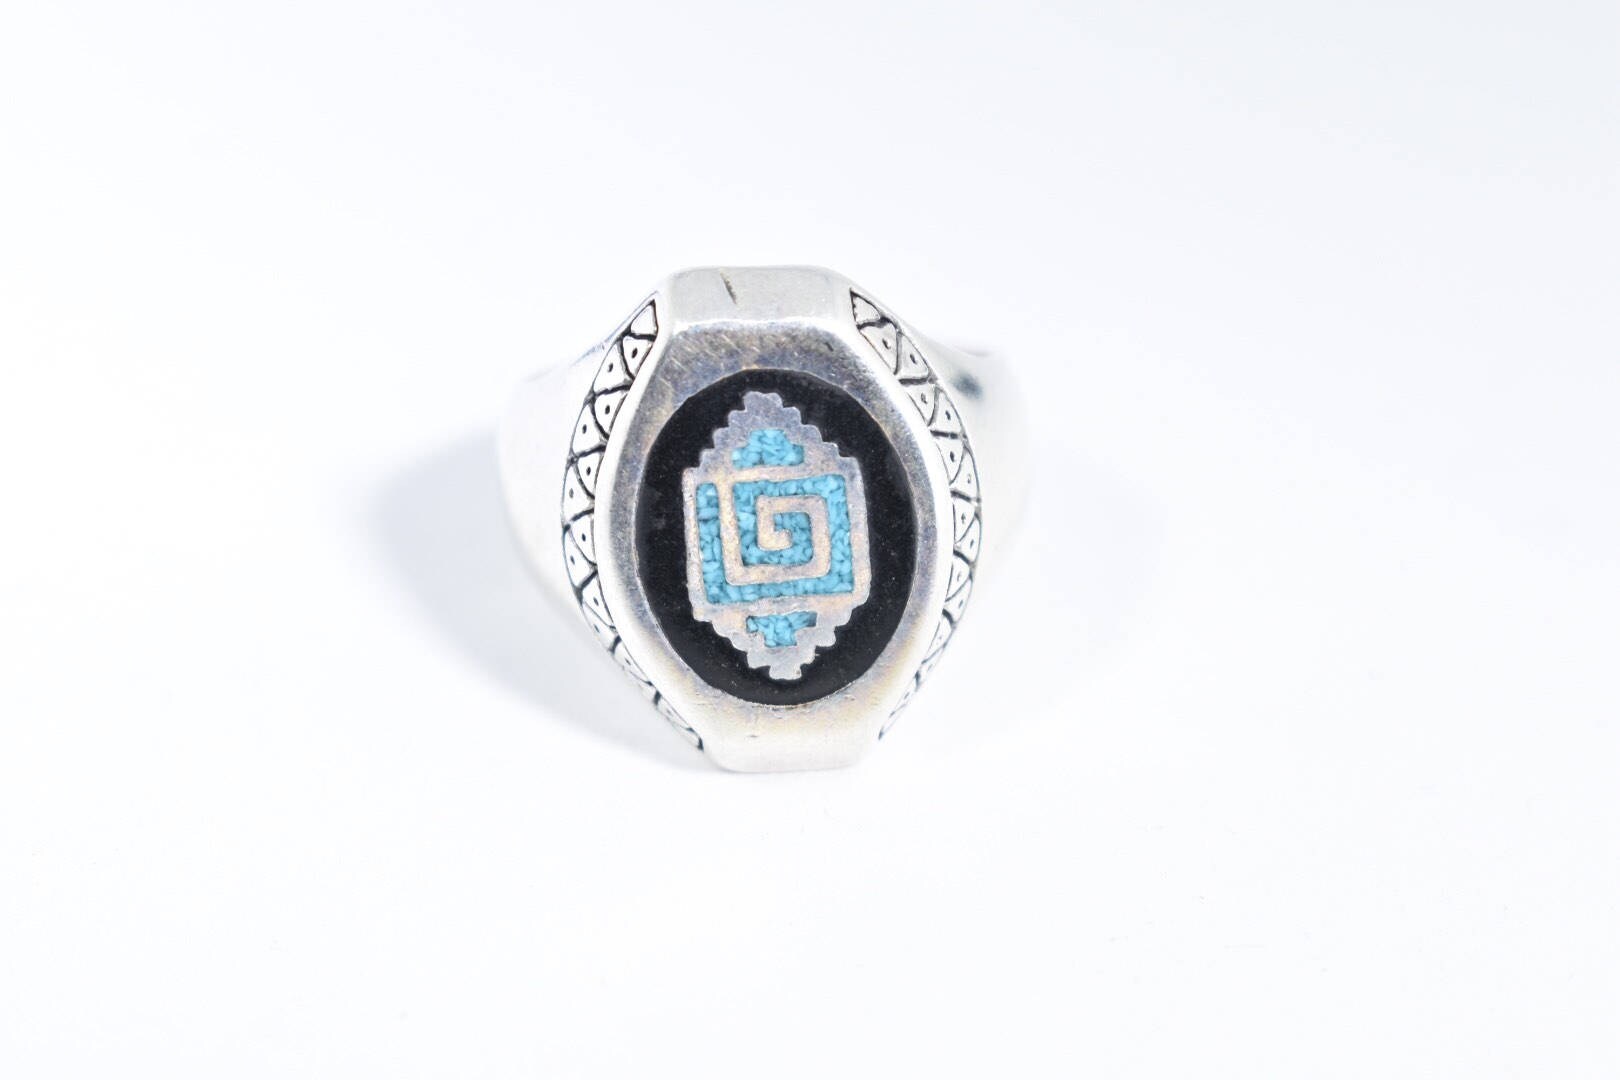 Vintage Native American Style Southwestern Turquoise Stone Inlay Men's Ring